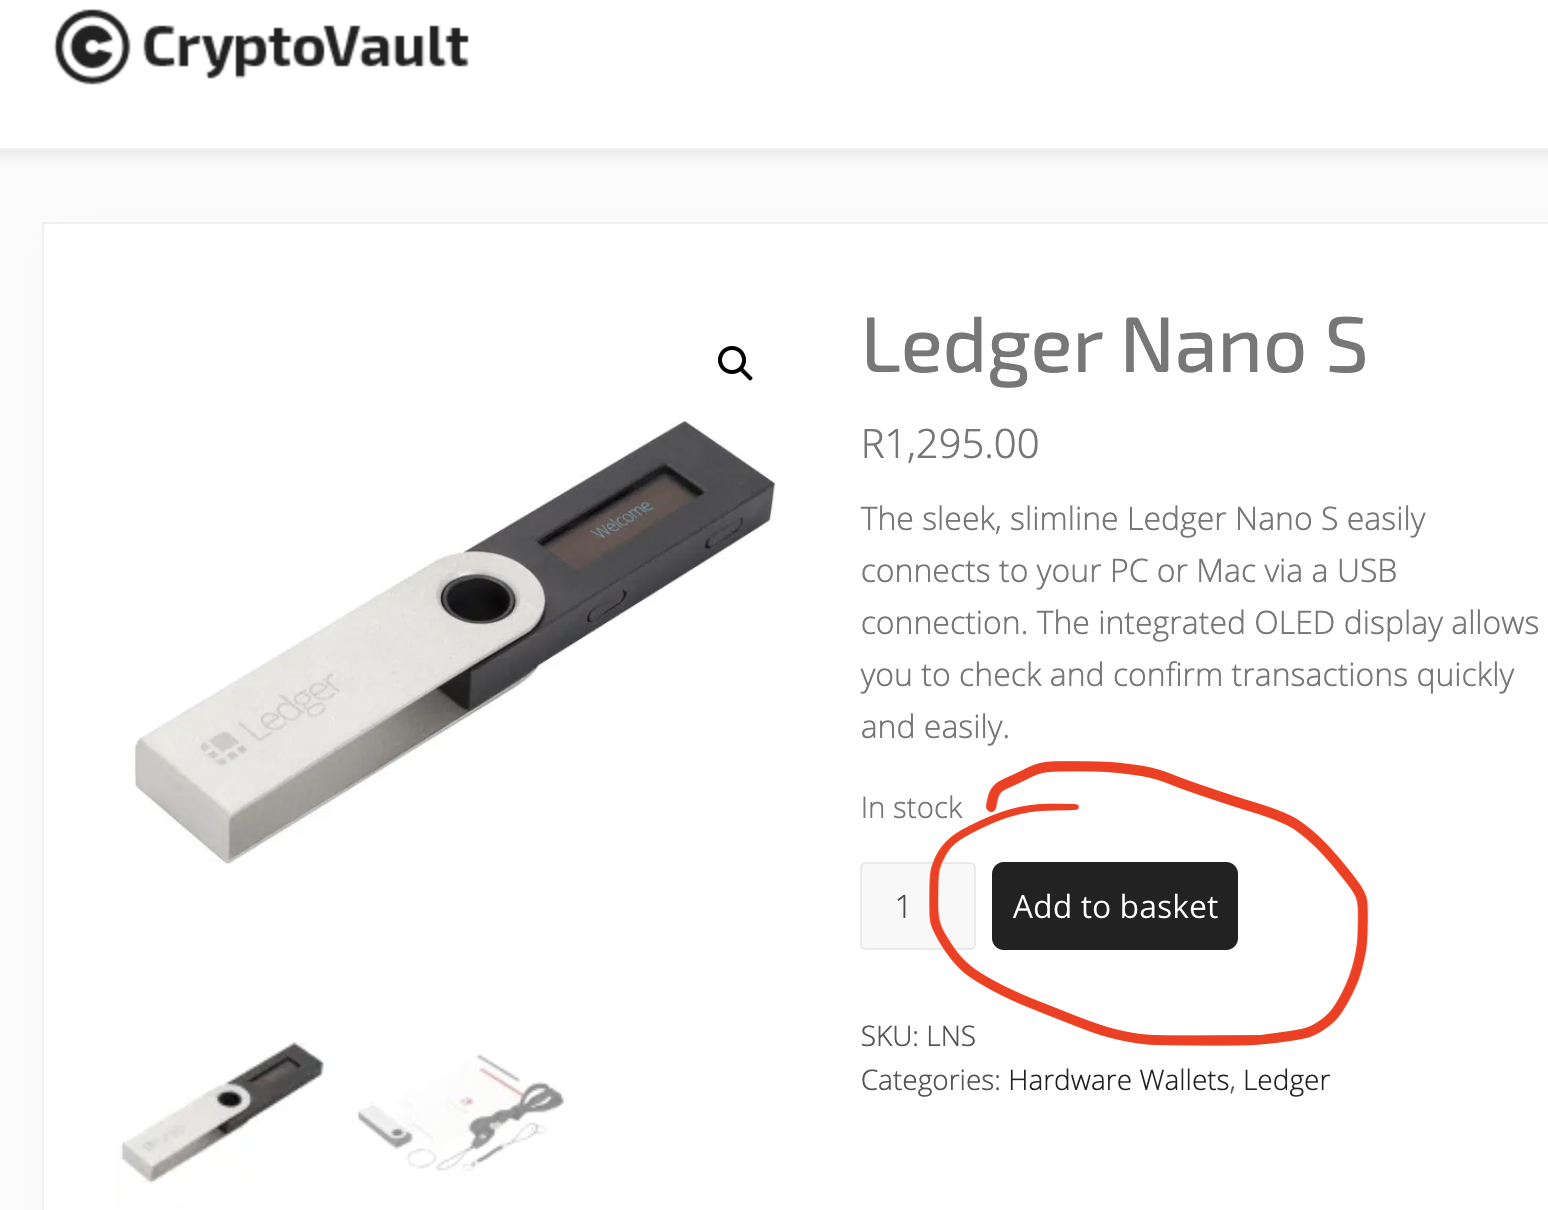 Common Questions about Ledger Wallet and Coupon Codes